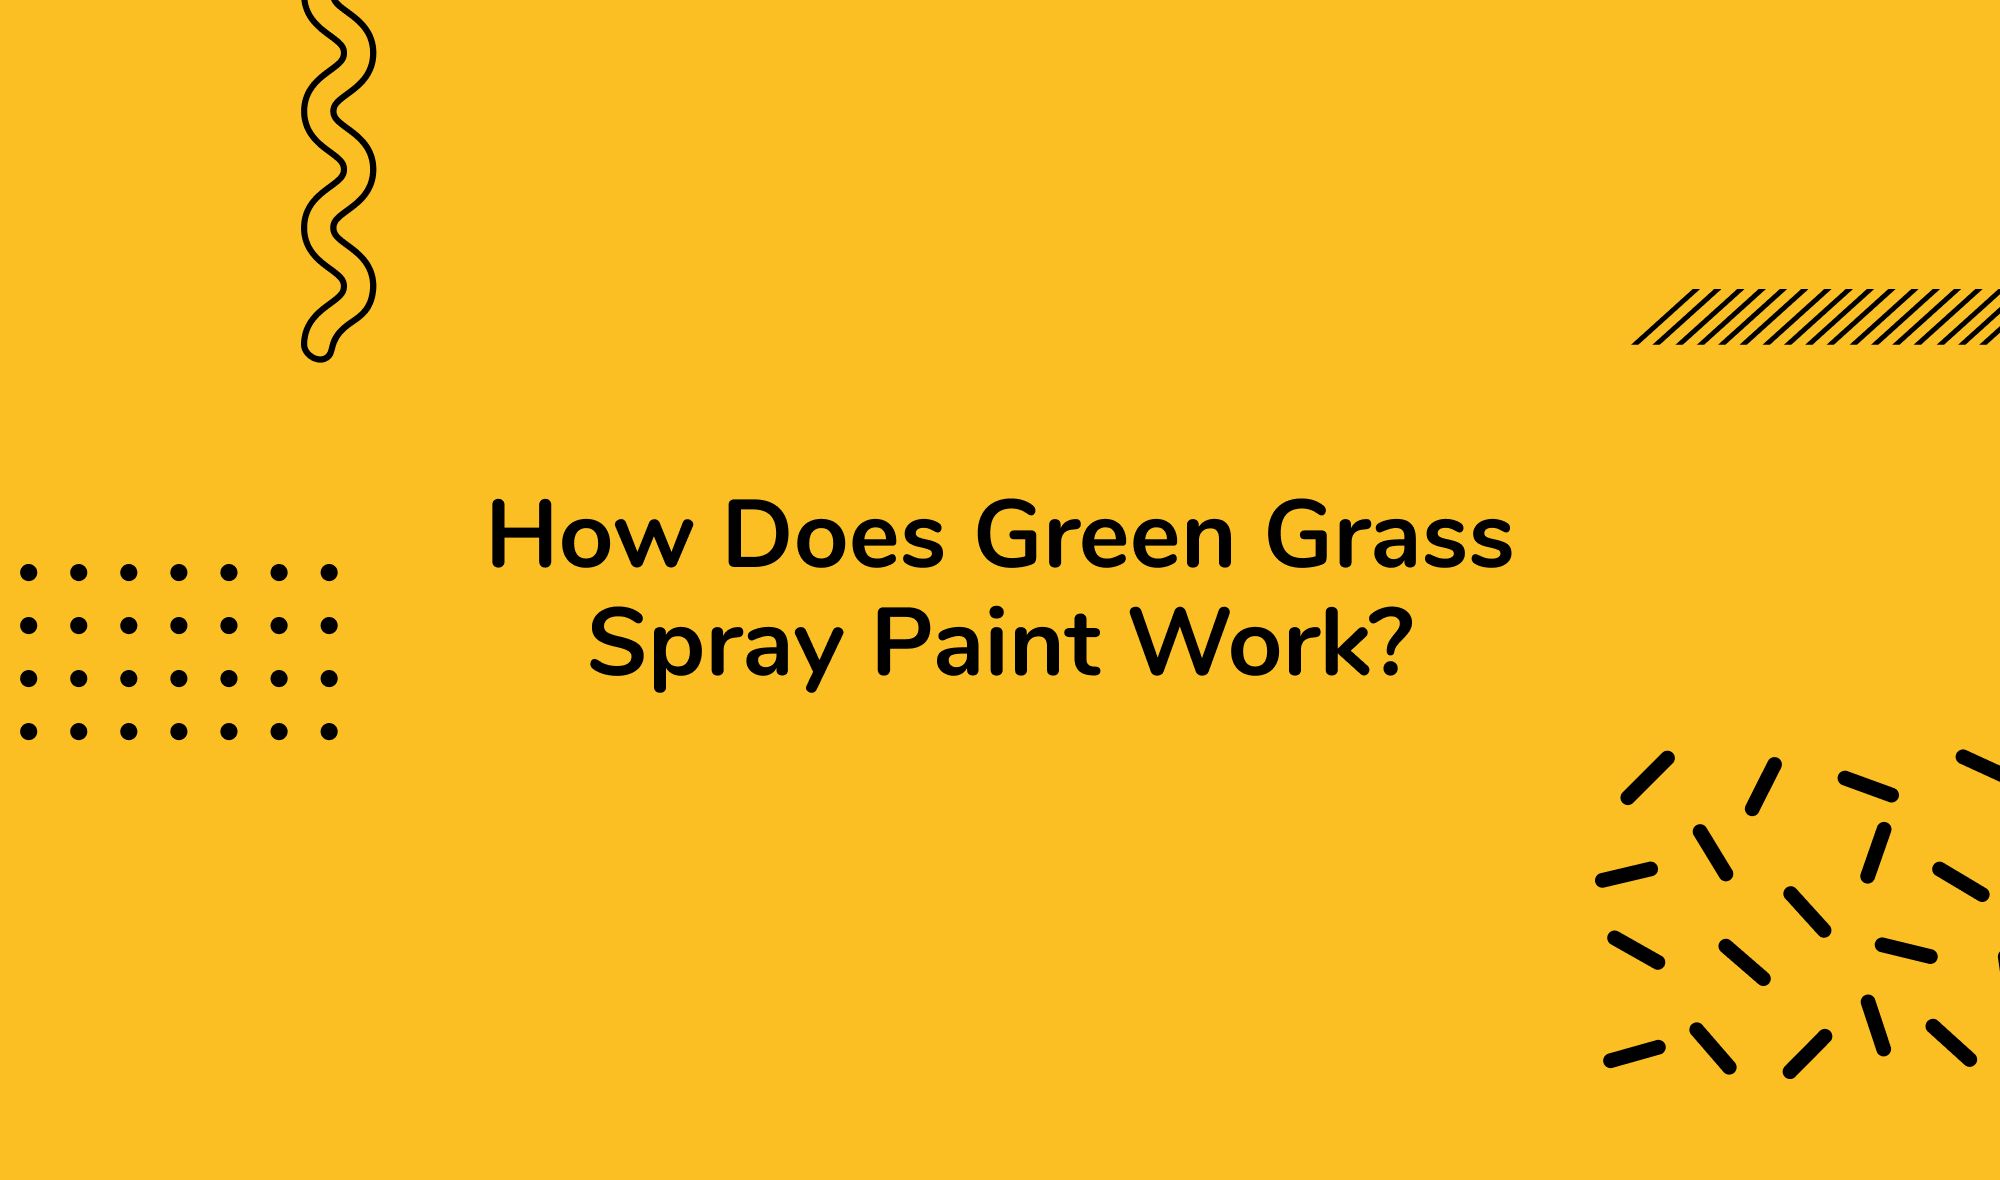 How Does Green Grass Spray Paint Work?